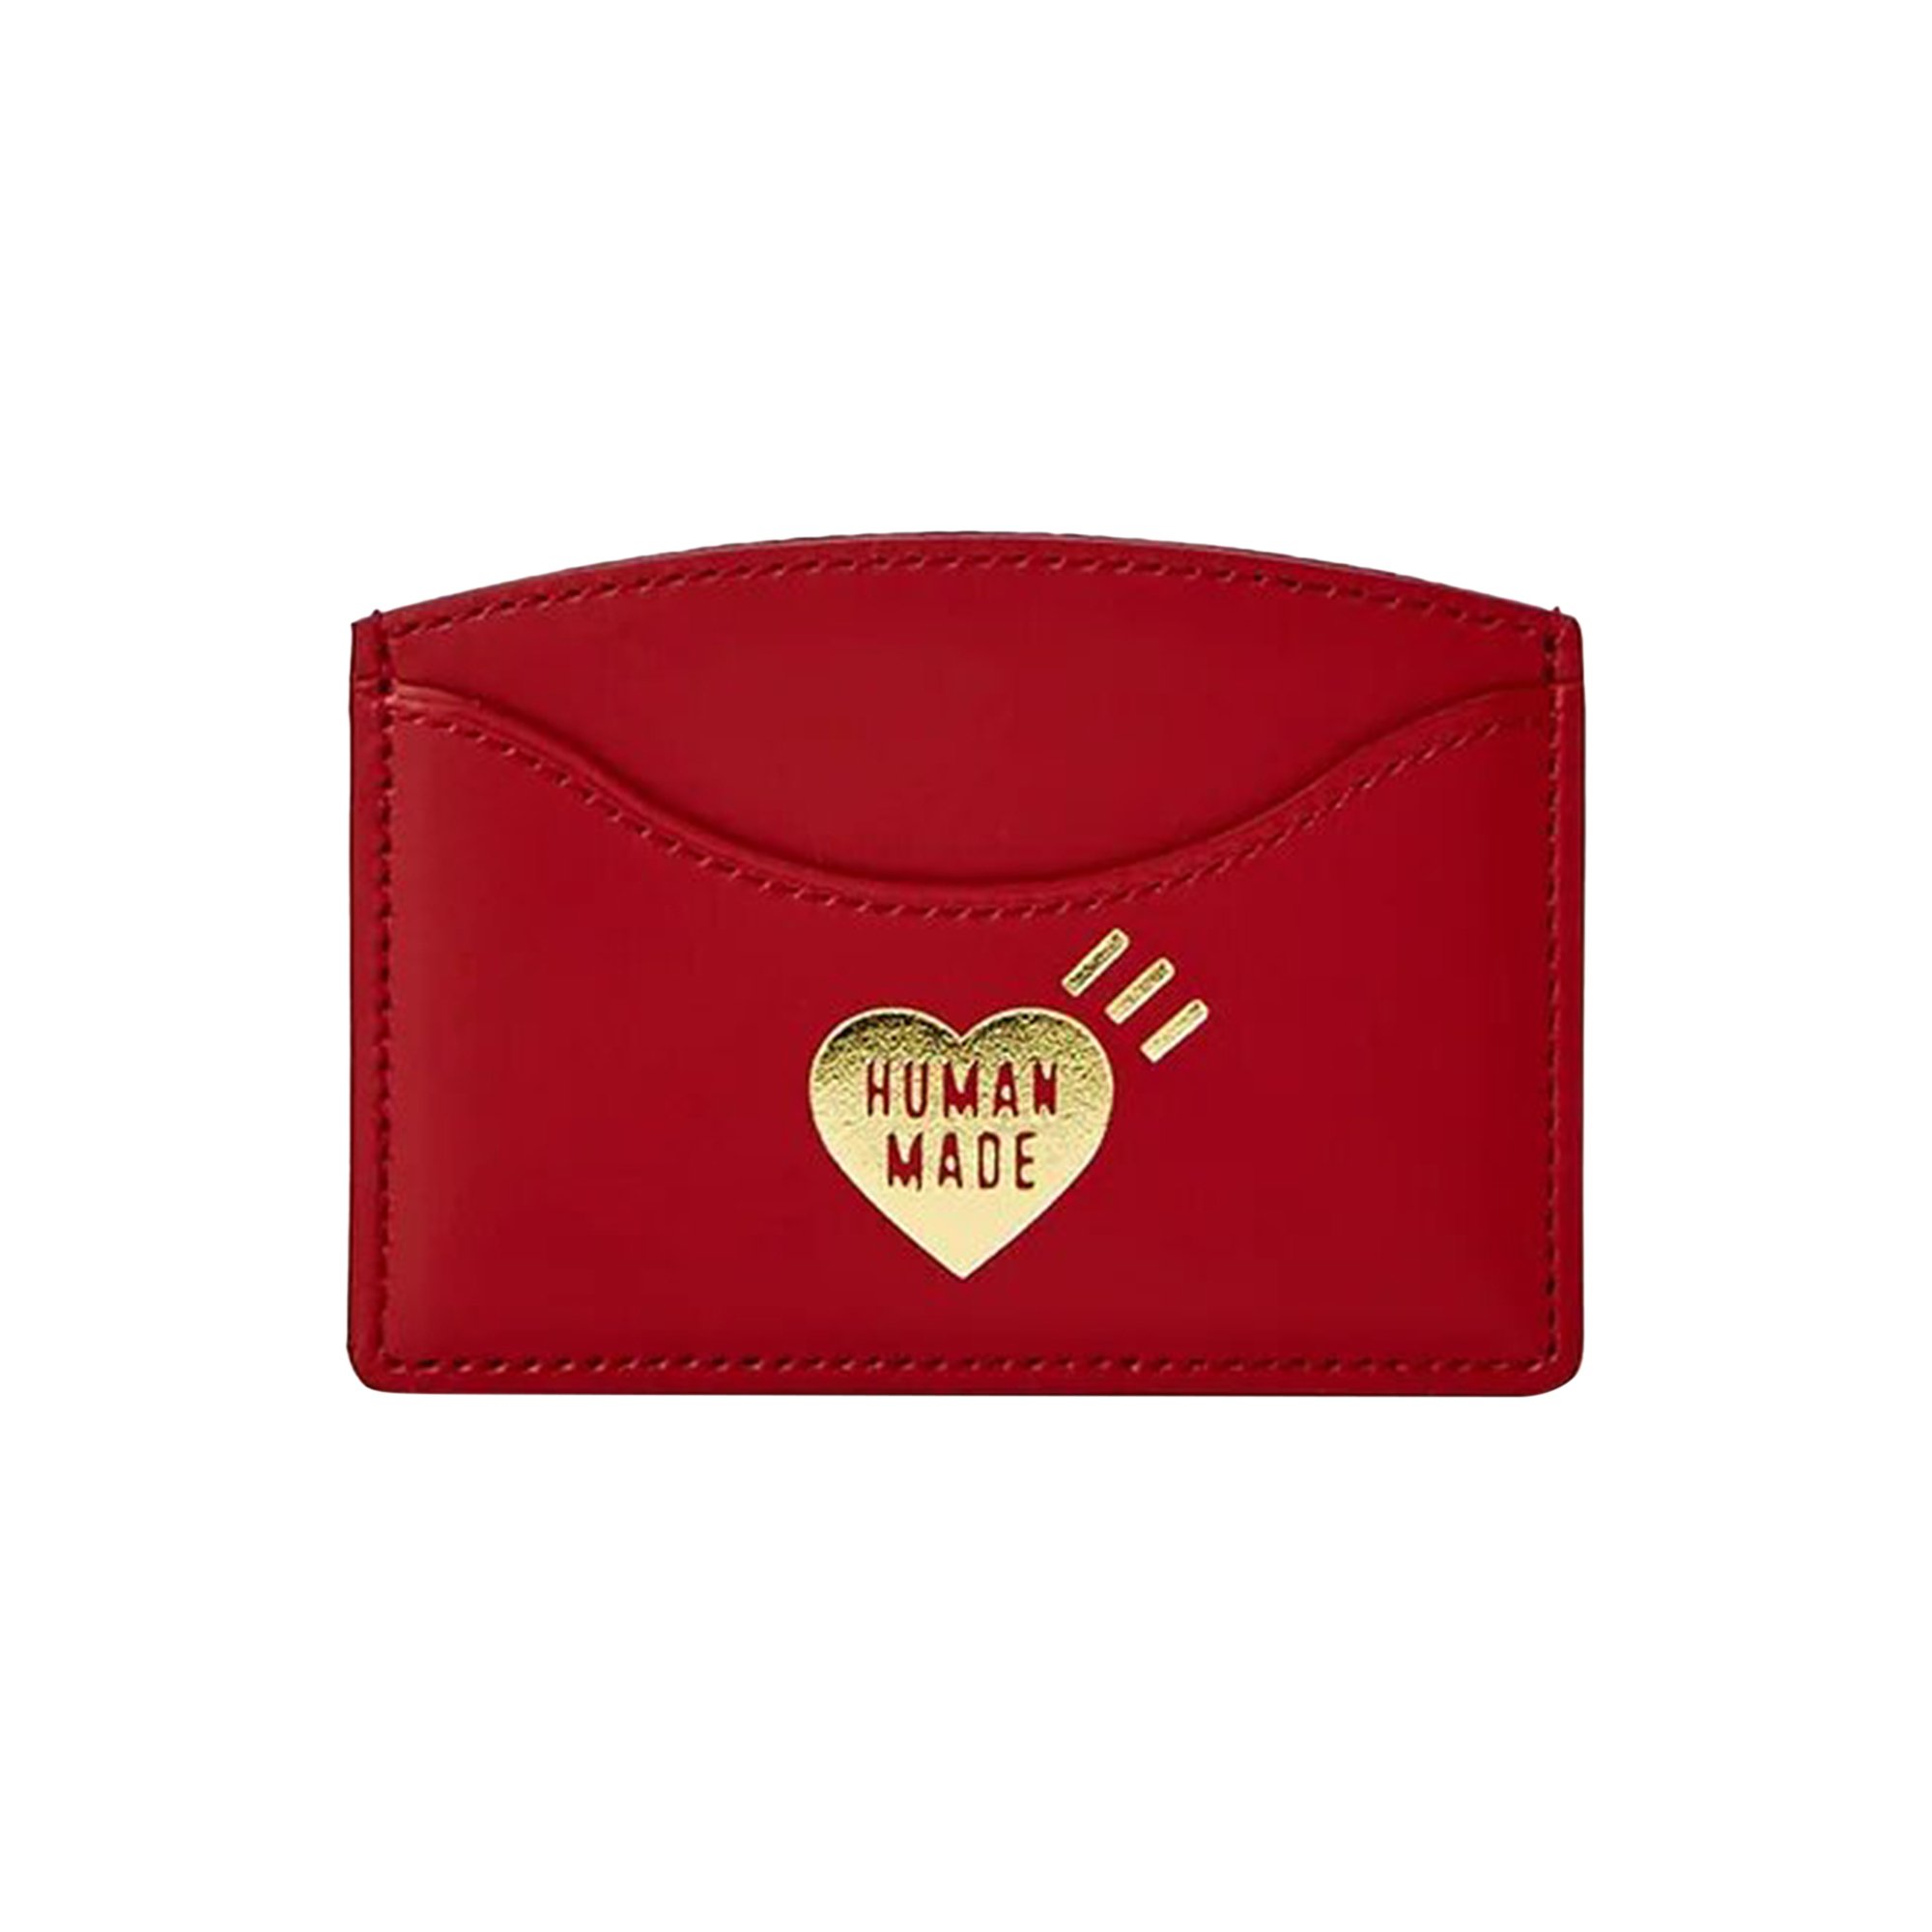 Buy Human Made Leather Card Case 'Red' - HM25GD060 RED | GOAT